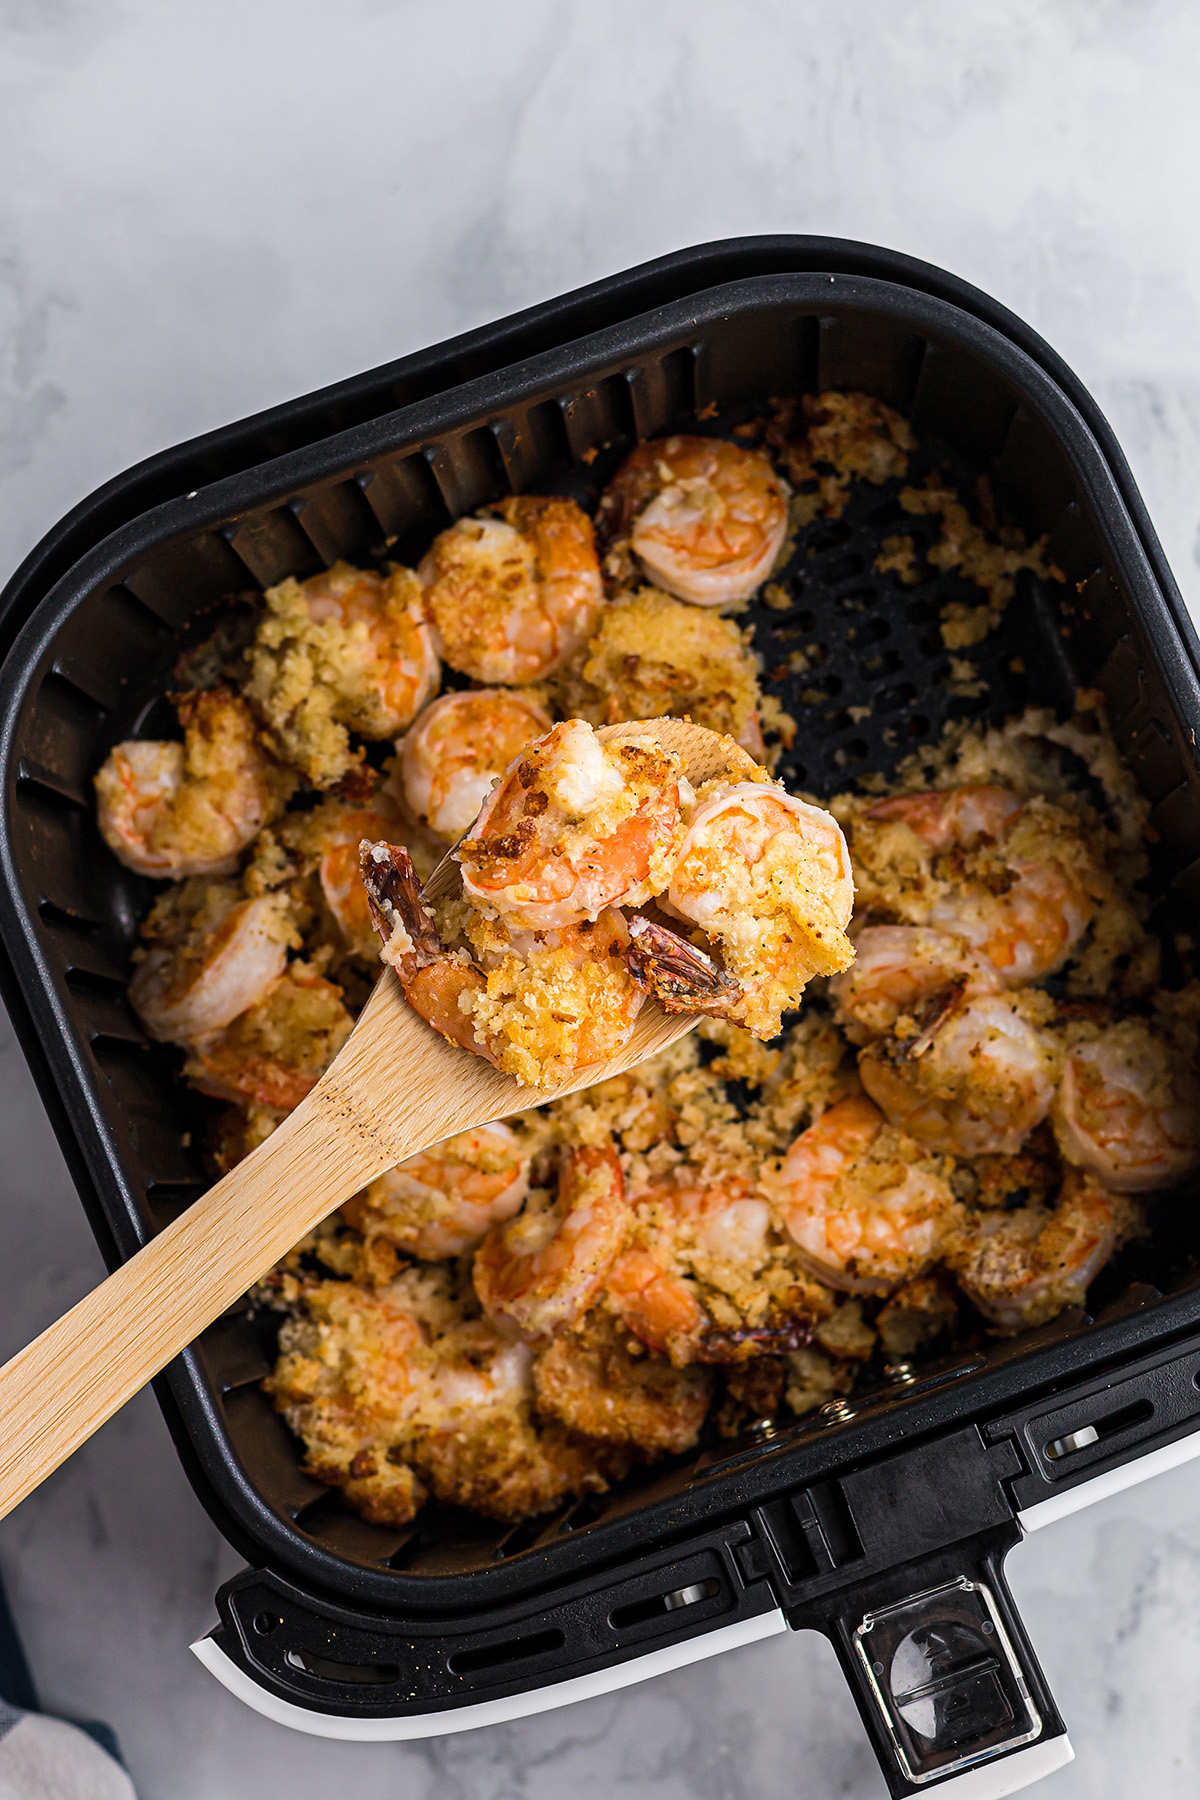 A wooden spoon scooping shrimp out of an air fryer basket